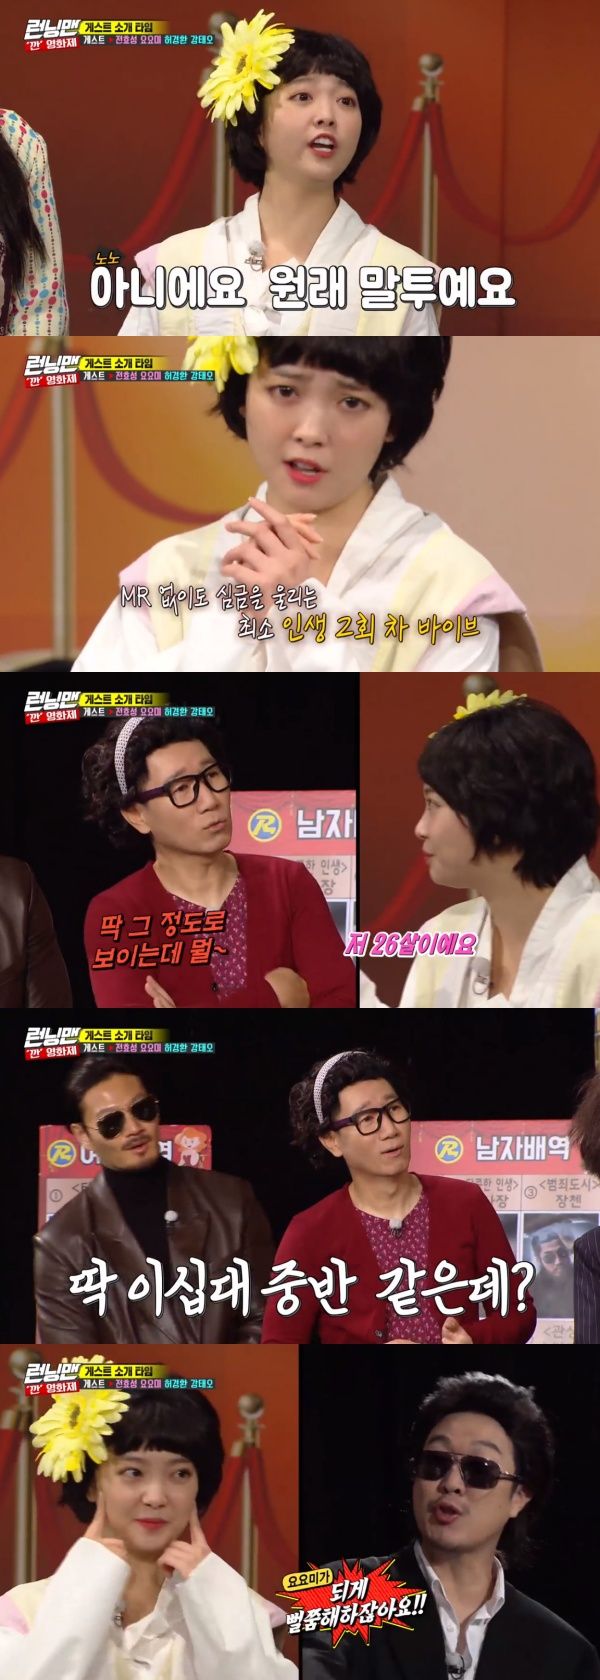 Running Man Ji Suk-jin says he looks as good as Age of Yo-Yo alreadySBS entertainment program Running Man broadcasted on the 29th was featured as a special feature of Kang Film Festival, and singer Hyosung, Yo-Yo albumy, actor Kang Tae-oh and comedian Hur Kyung-hwan appeared as guests.On this day, Yo-Yo already greeted with a unique voice, and the members praised it as cute.In particular, Ji Suk-jin introduced it as a trot singer I look out for.Is the tone of the tone of the character or is it originally your tone? asked Yang Se-chan, who explained that this is the original voice and tone.Theres a bit of Age than it looks, Yoo Jae-Suk said of Yo-Yo already.A lot of attention was focused on the Age of Yo-Yo already, and Yo-Yo already informed him that he was 26 years old.Then Ji Suk-jin laughed, telling her candidly: It looks just like that - I would be surprised at about 33.